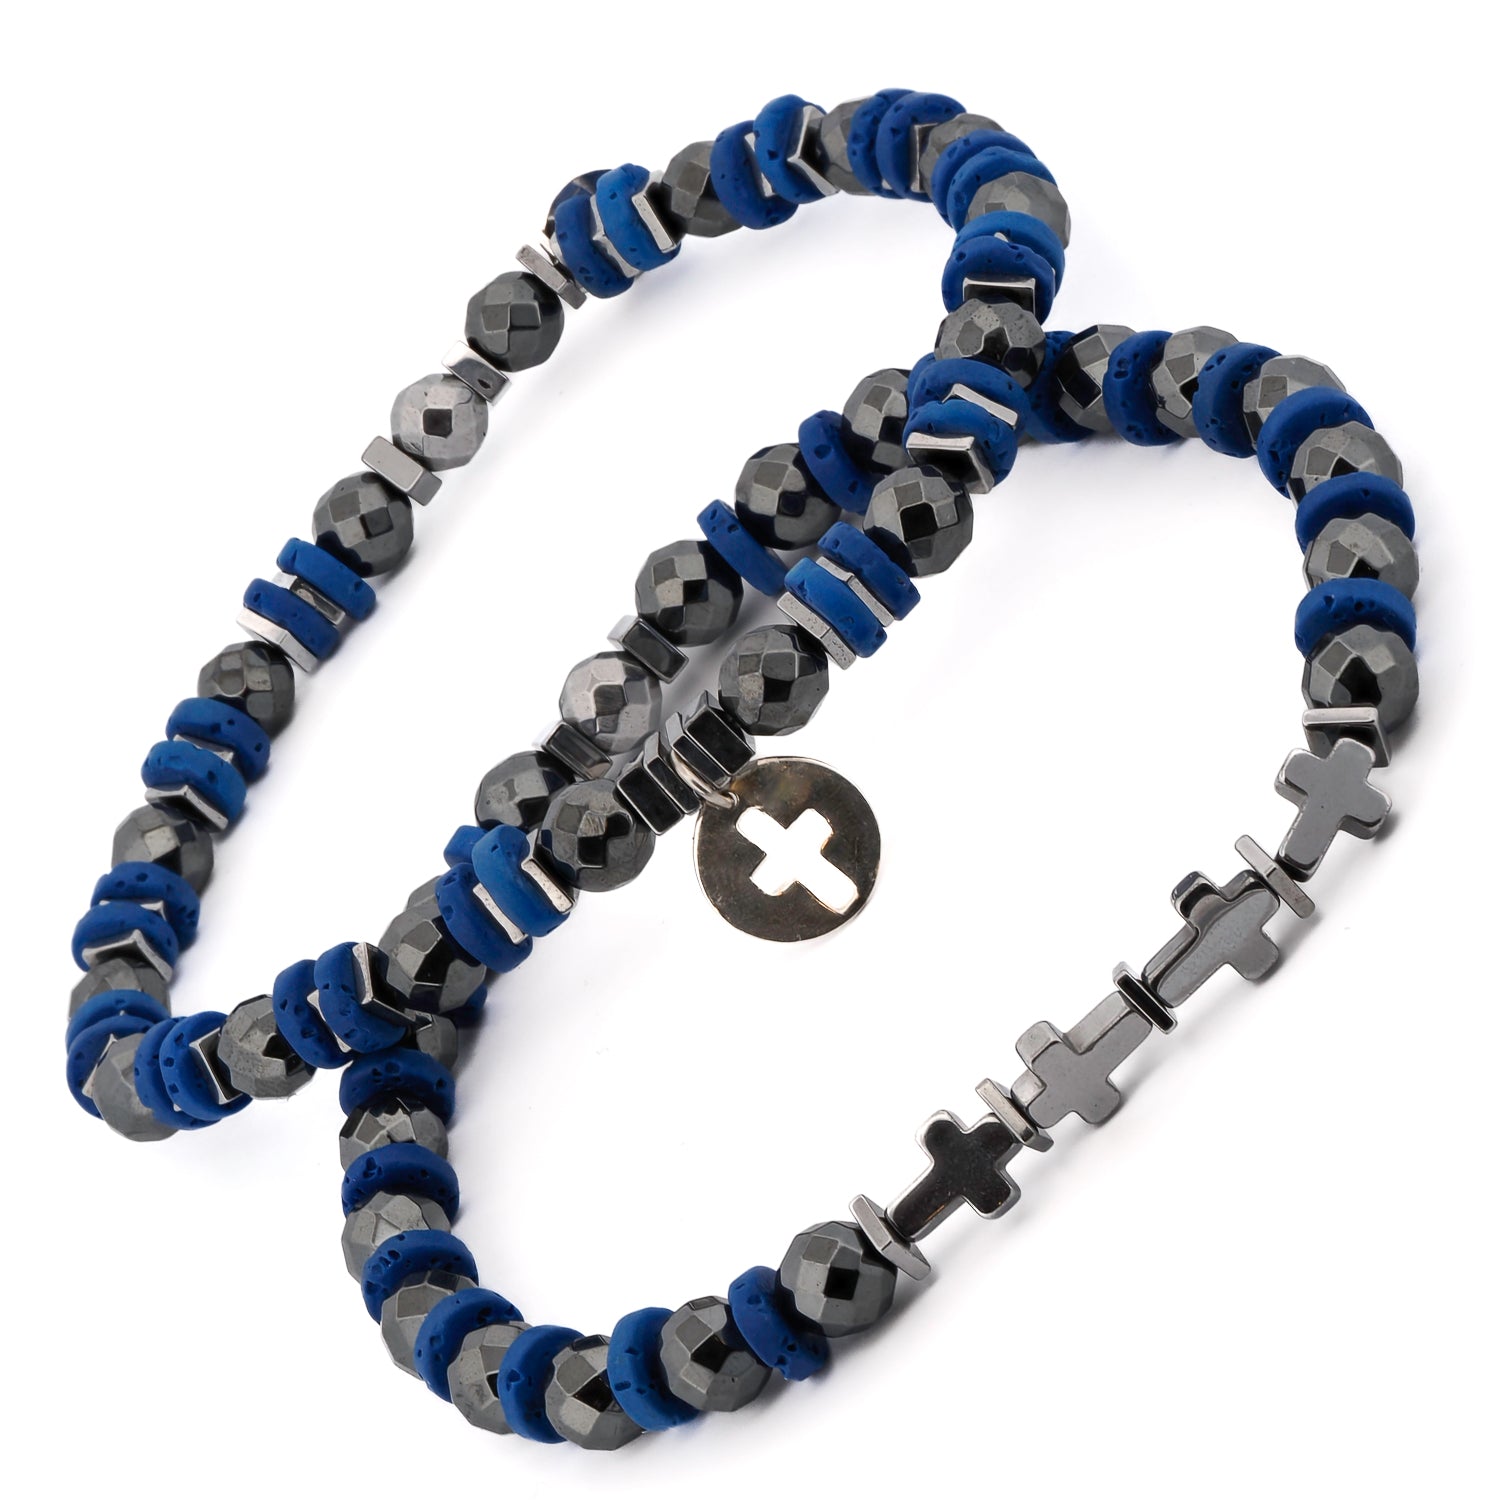 Unique Good Vibes Bracelet Set with natural hematite stones, calming blue lava rocks, and a sterling silver cross charm